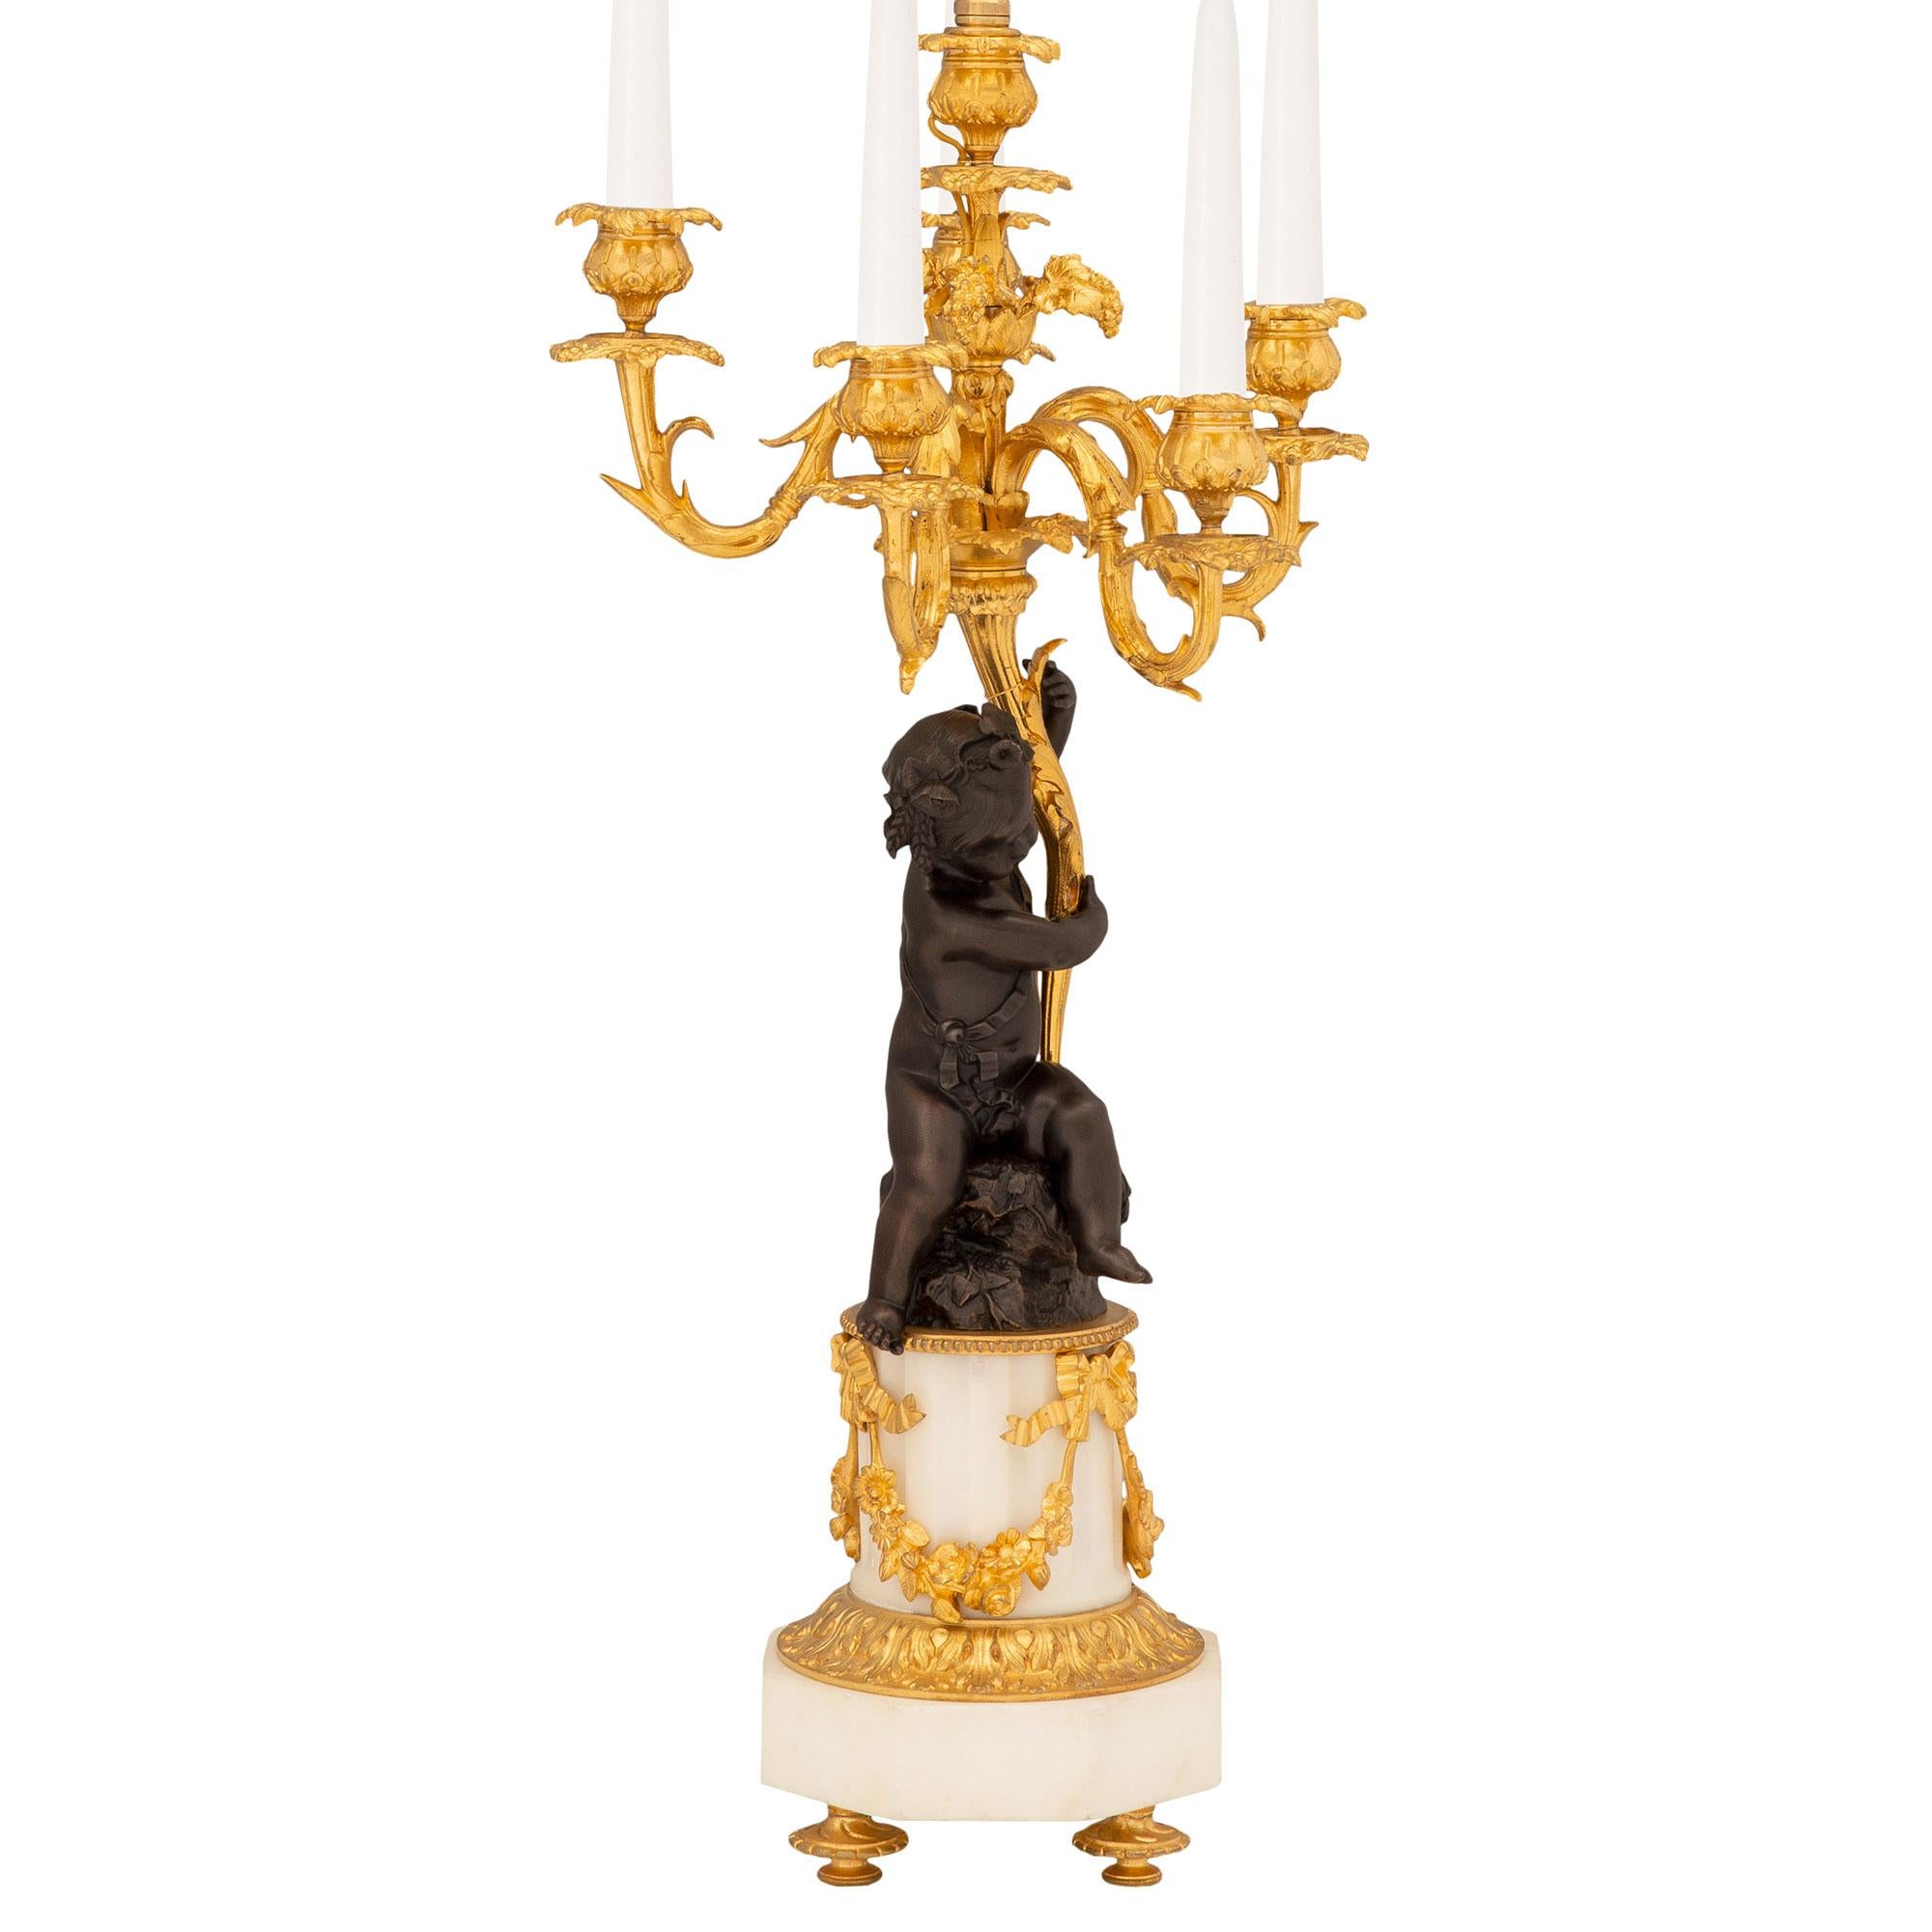 A stunning and high quality pair of French 19th century white Carrara marble, ormolu and patinated bronze candelabra lamps. Each six arm candelabra is raised by fine ormolu topie feet below the octagonal white Carrara marble base with a fine wrap